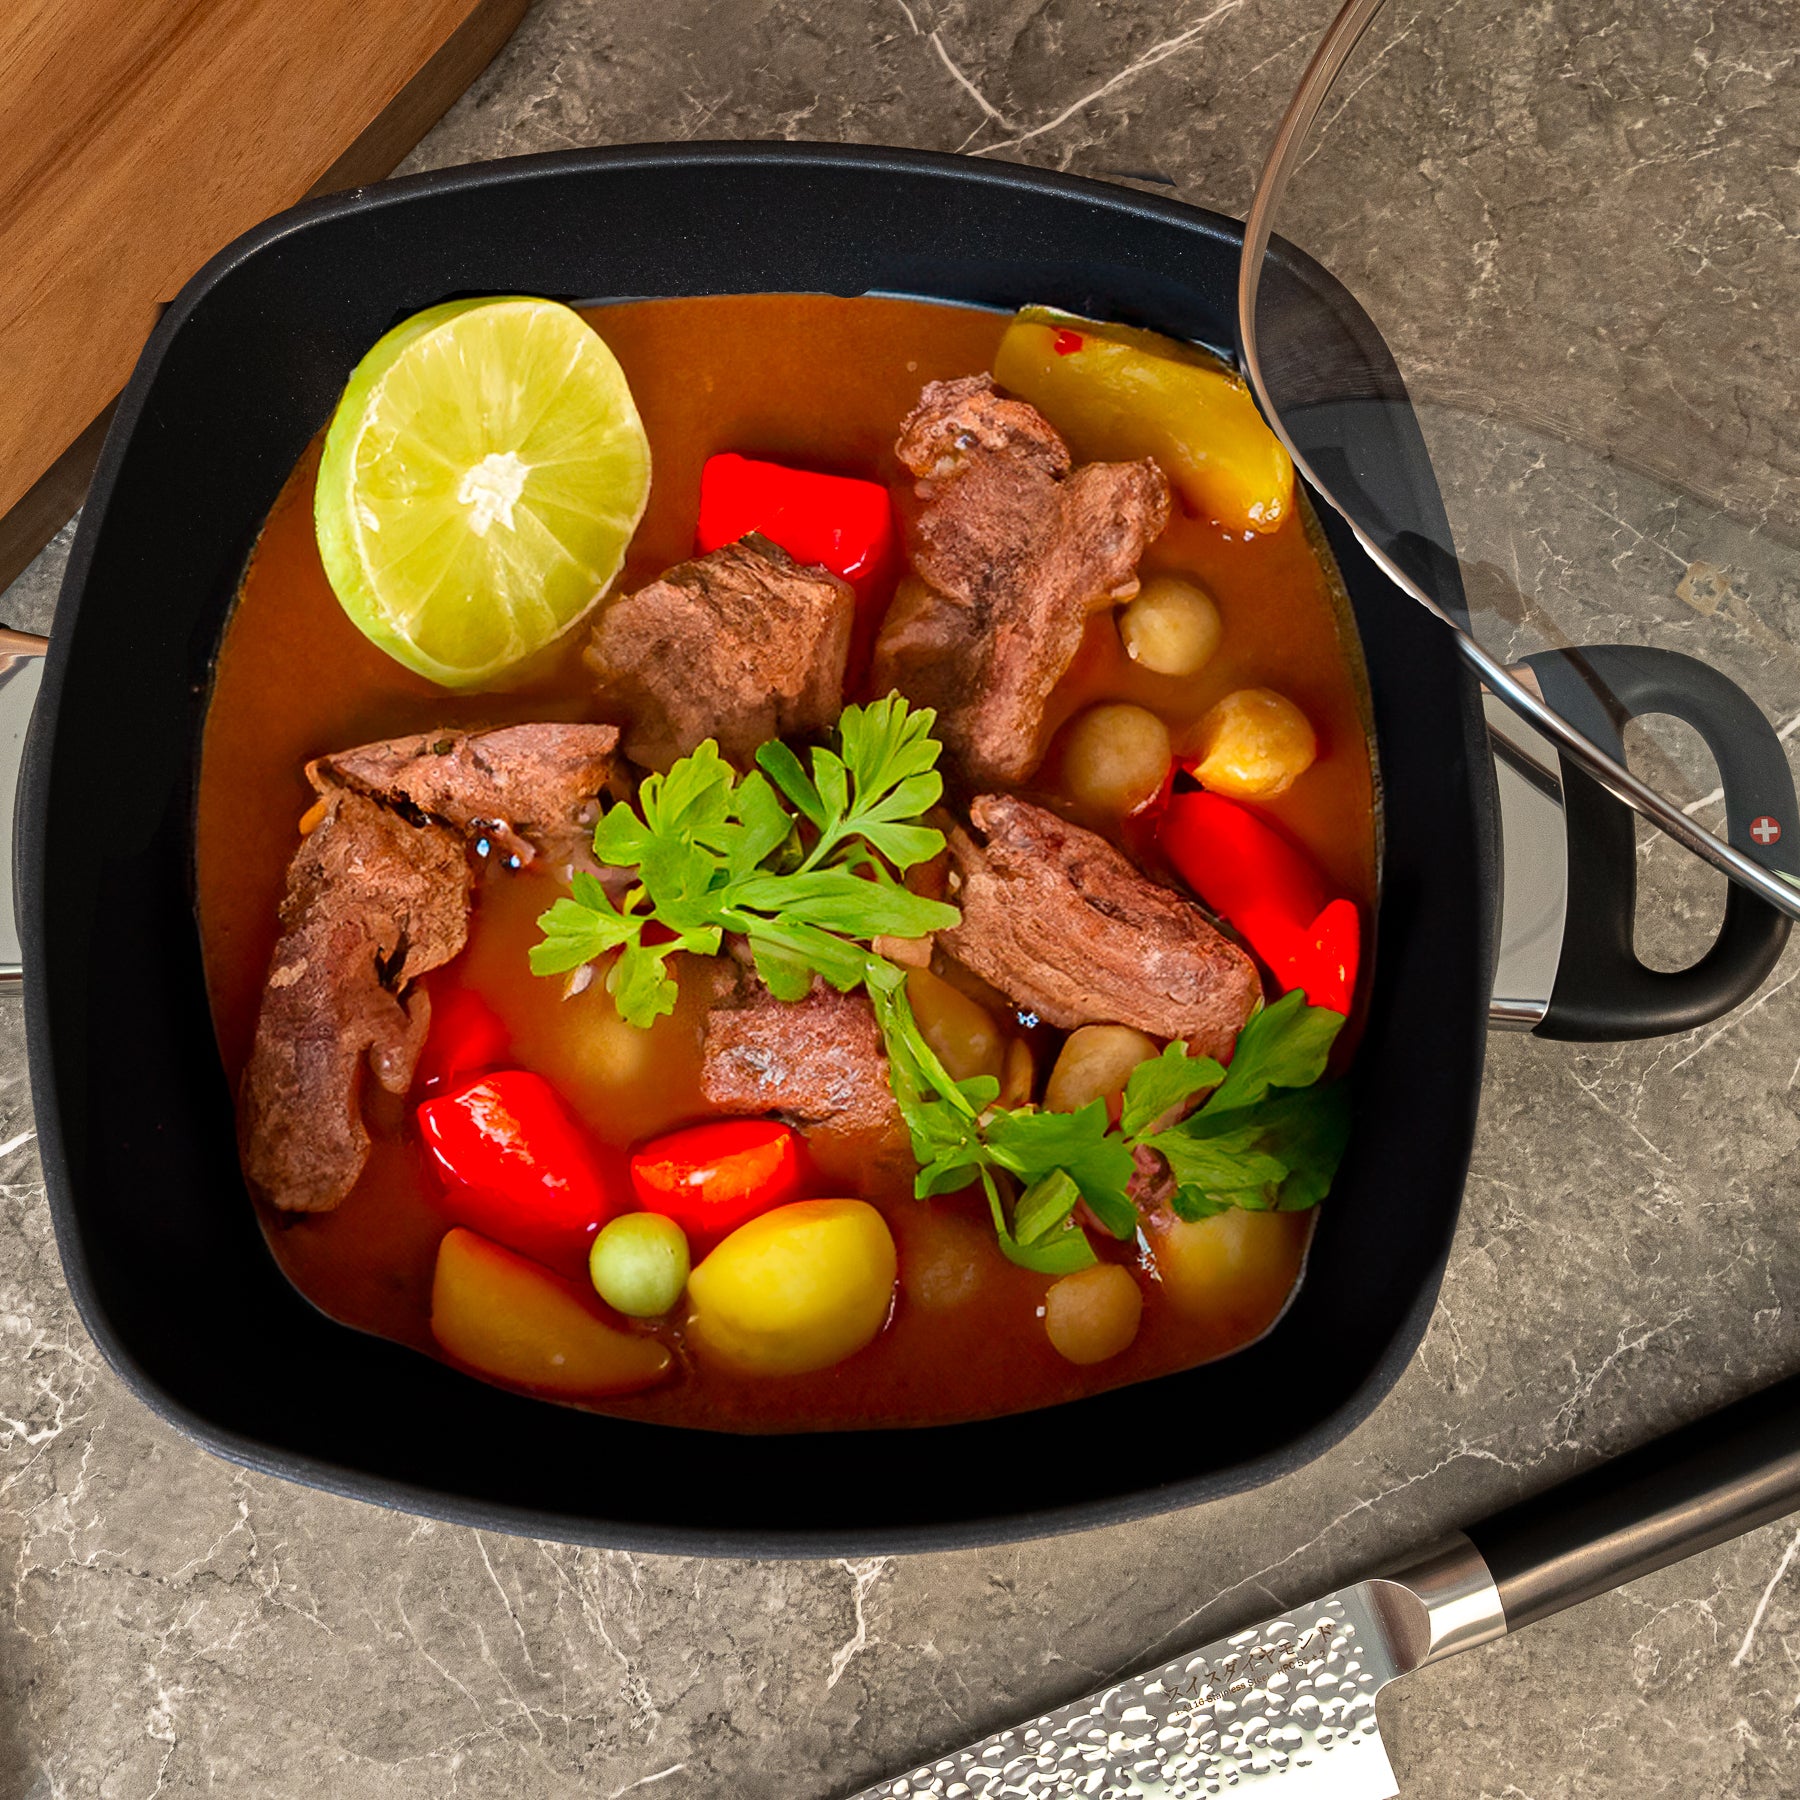 HD Nonstick 5 qt Square Casserole with Glass Lid - Induction in use with stew inside